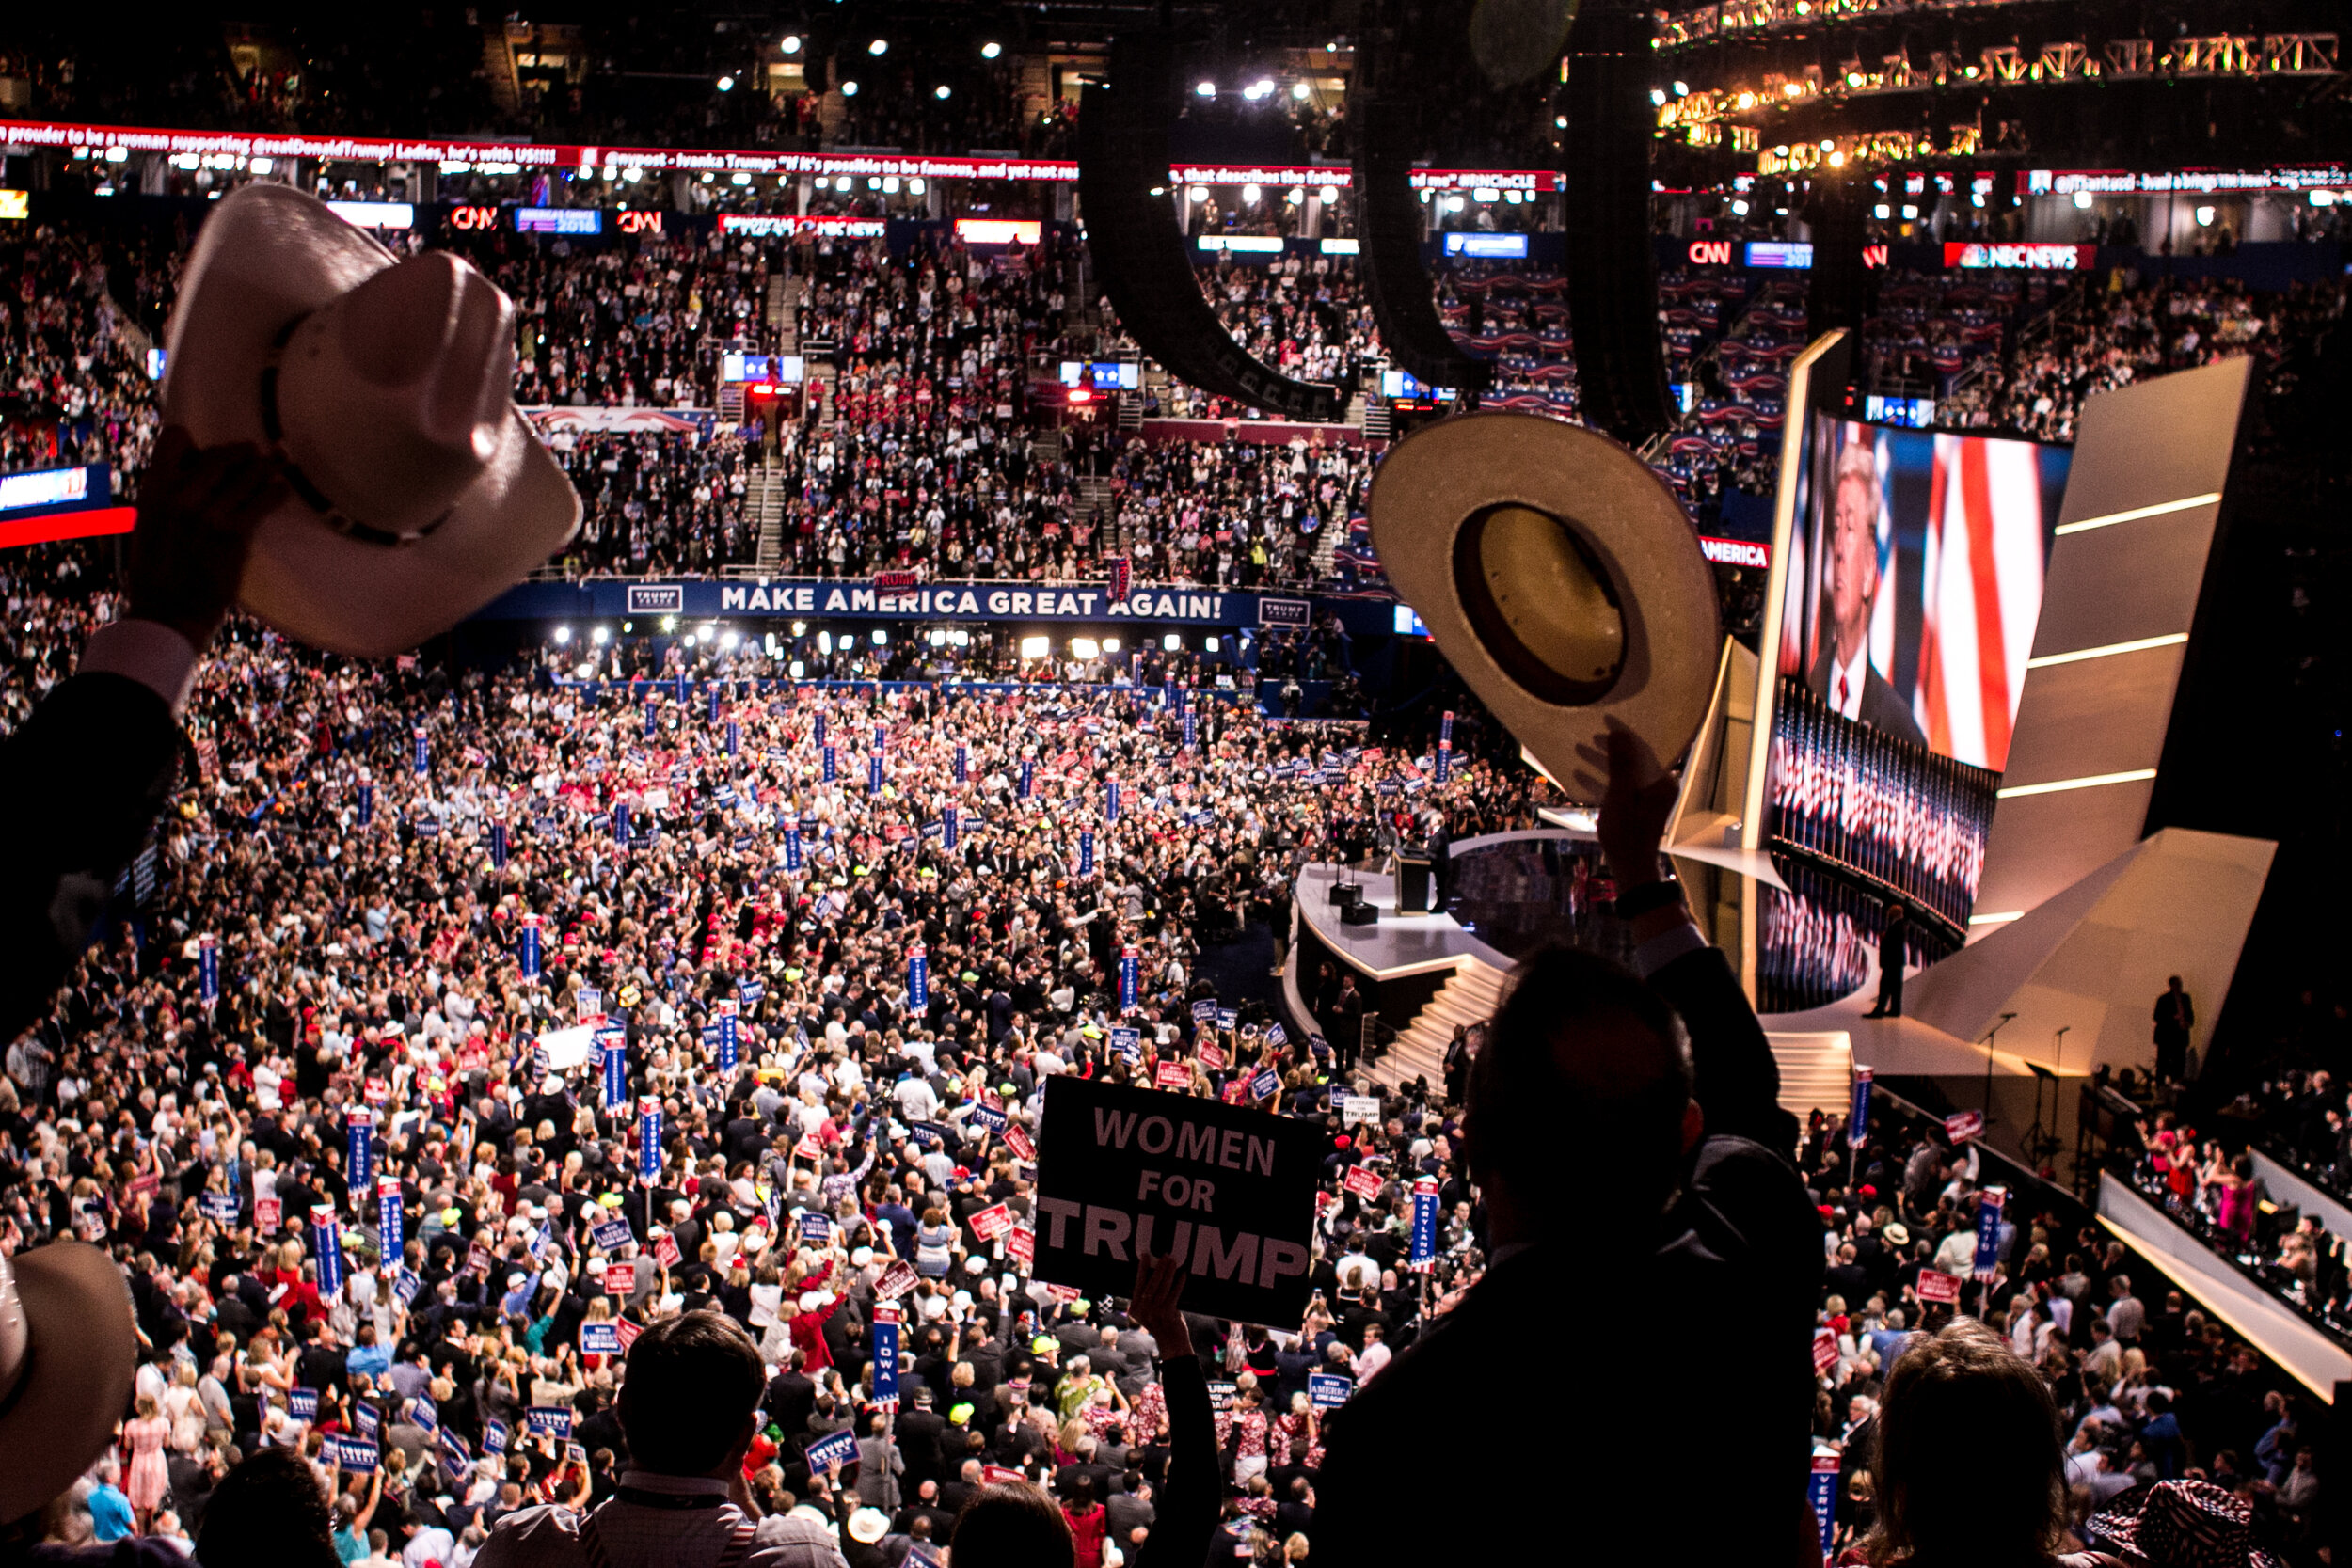  Attendees cheer as Republican presidential candidate Donald Trump is introduced during the Republican National Convention on July 21, 2016 at Quicken Loans Arena in Cleveland, Ohio. 